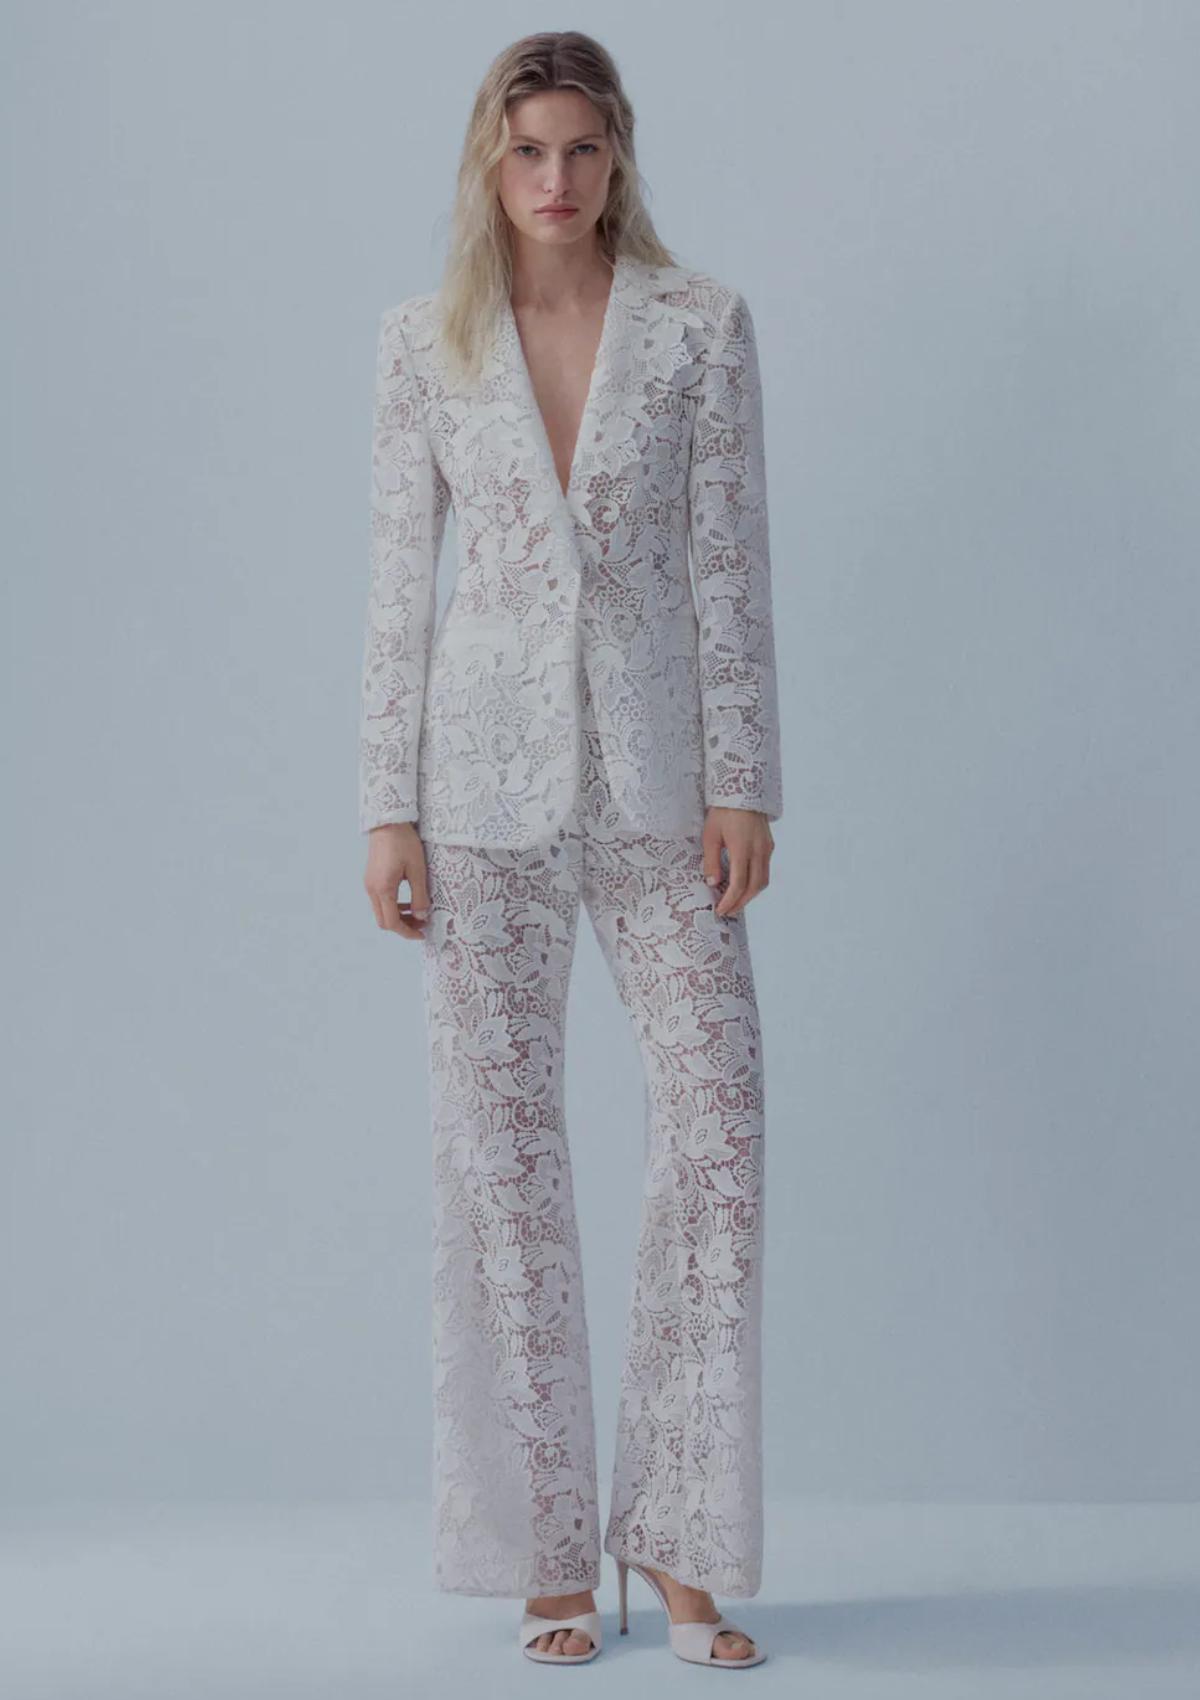 15 Wedding Suits for Women - The Best Wedding Suits